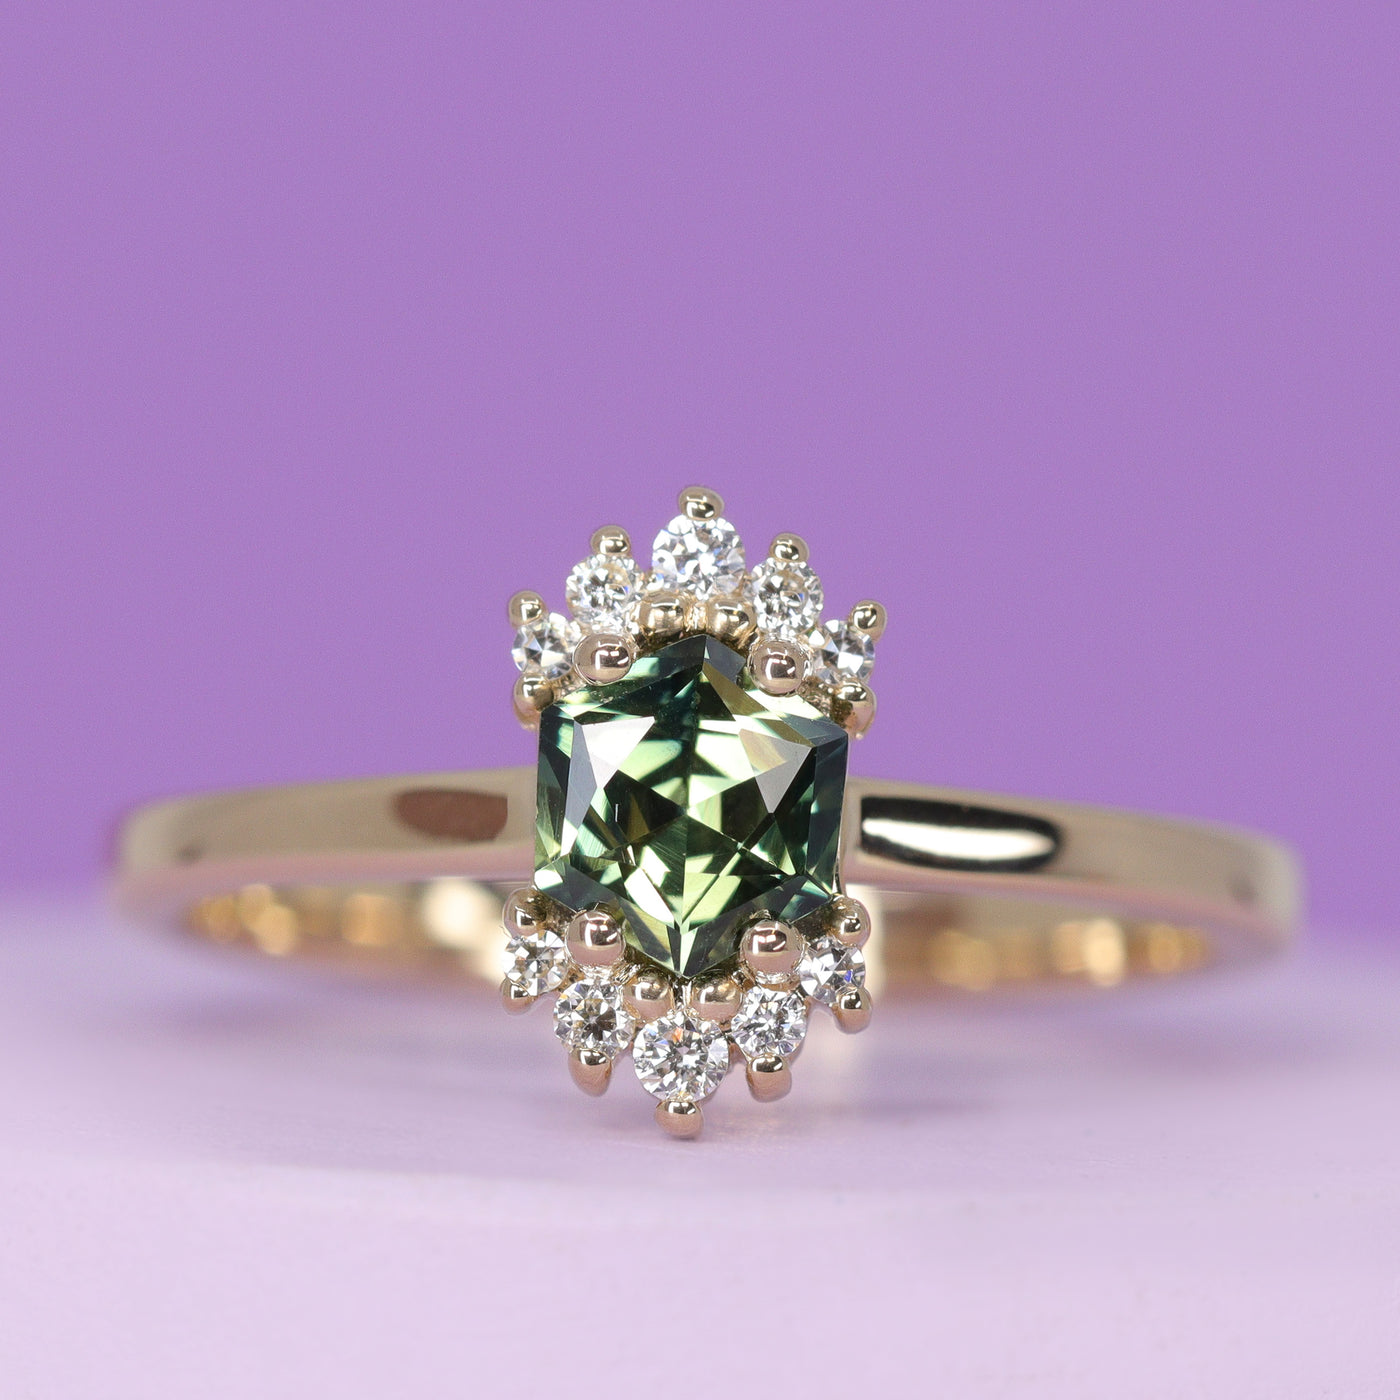 Ariana - Hexagon Cut Green Teal Sapphire Ring with Double Diamond Crown in 14ct Yellow Gold - Ready-to-Wear